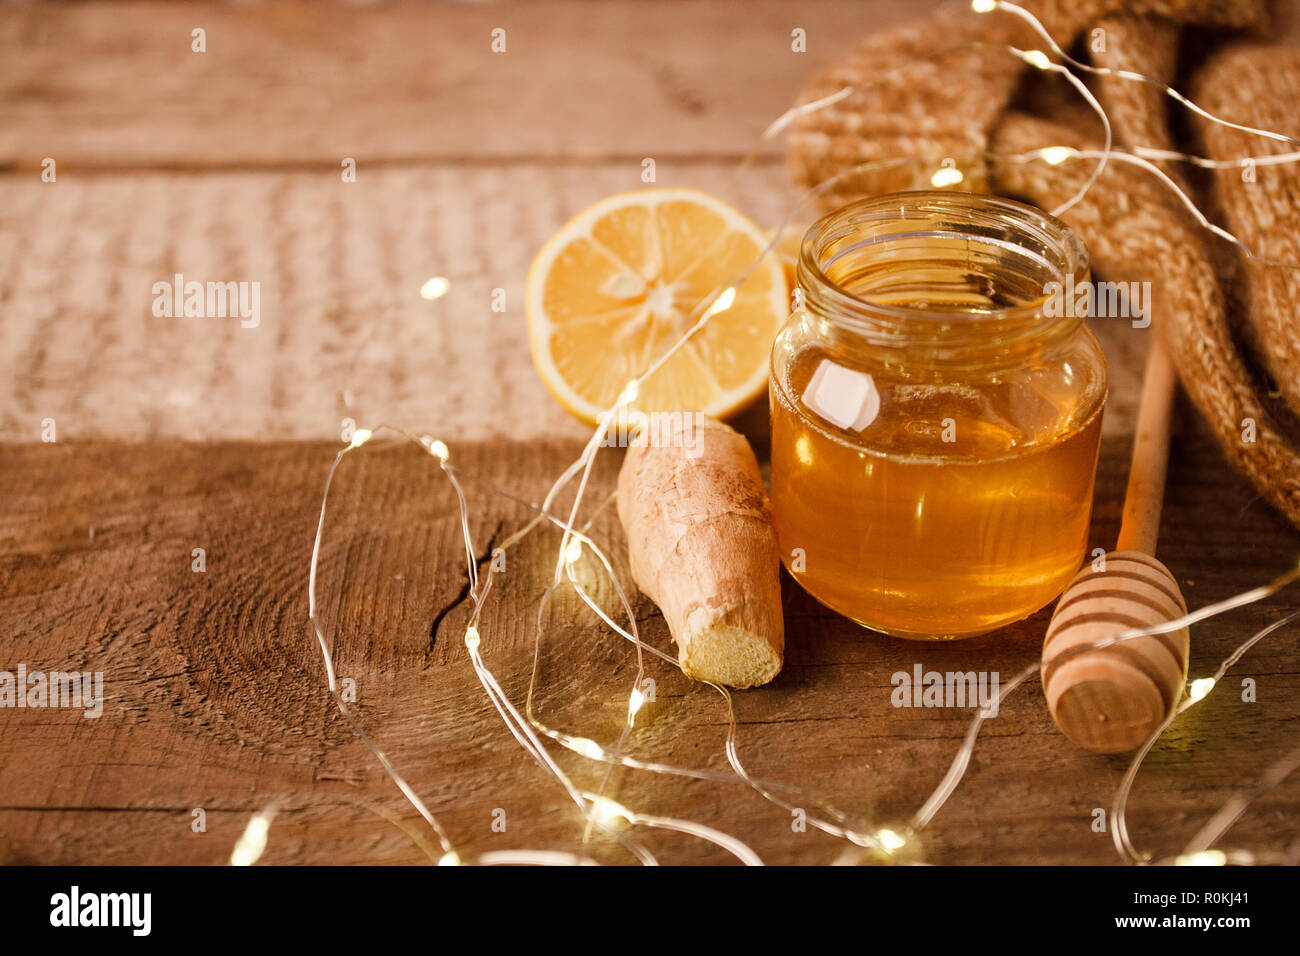 Composition with honey, lemon, ginger root as natural cold remedies on wooden background, winter holiday cozy home concept Stock Photo